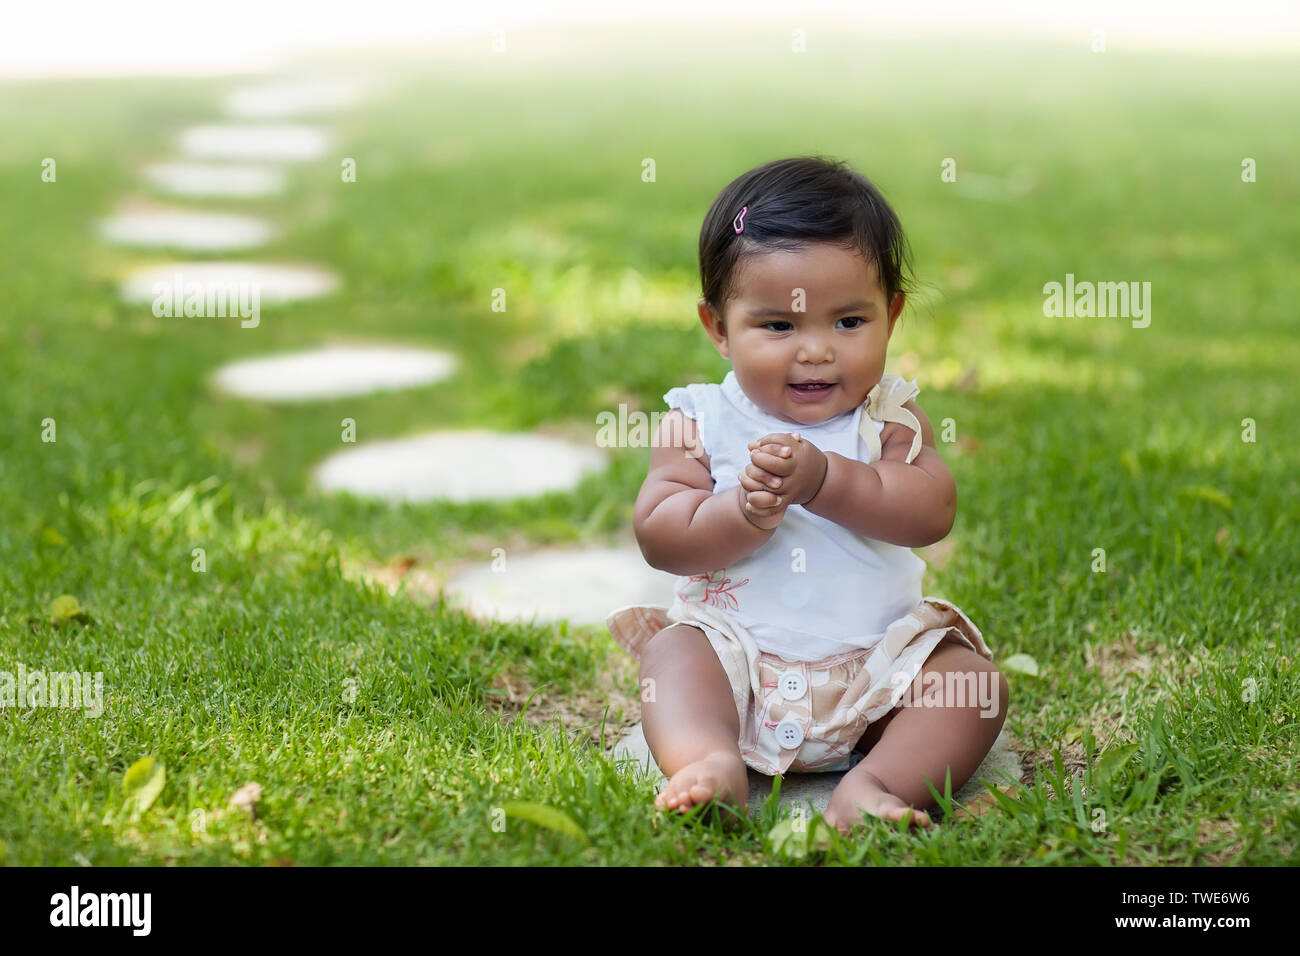 A baby girl grasping her own hands while sitting on the frontmost stepping stone from a series of stepping stones that go into perspective. Stock Photo